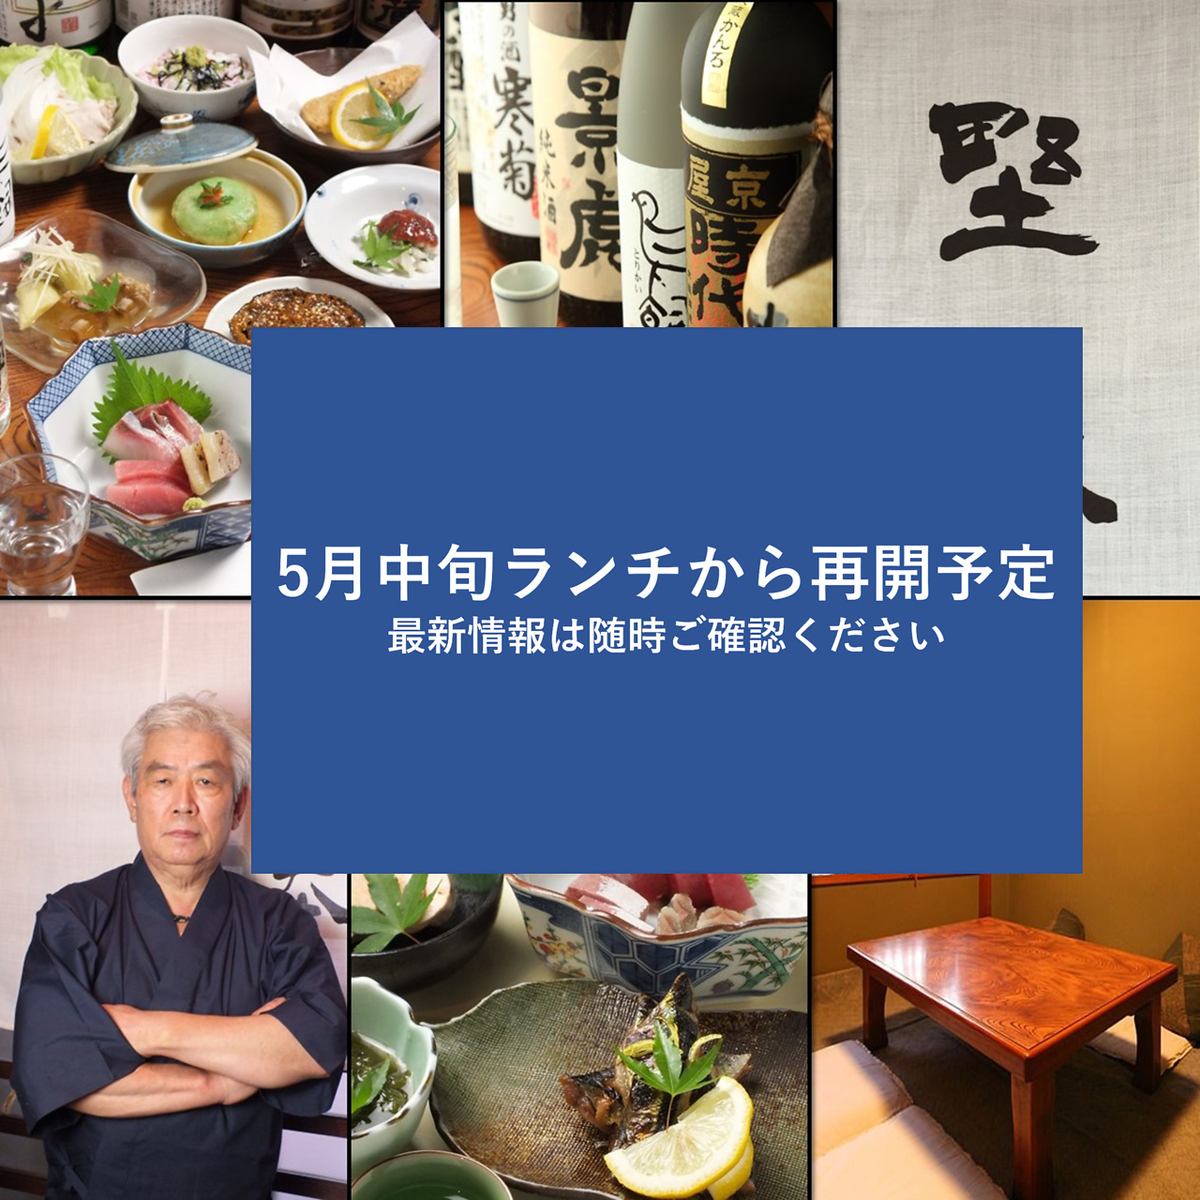 [Course meals from 3,500 yen/Private rooms for 3 or more people OK] With 44 years of experience, we offer authentic Japanese cuisine that makes the most of the ingredients.